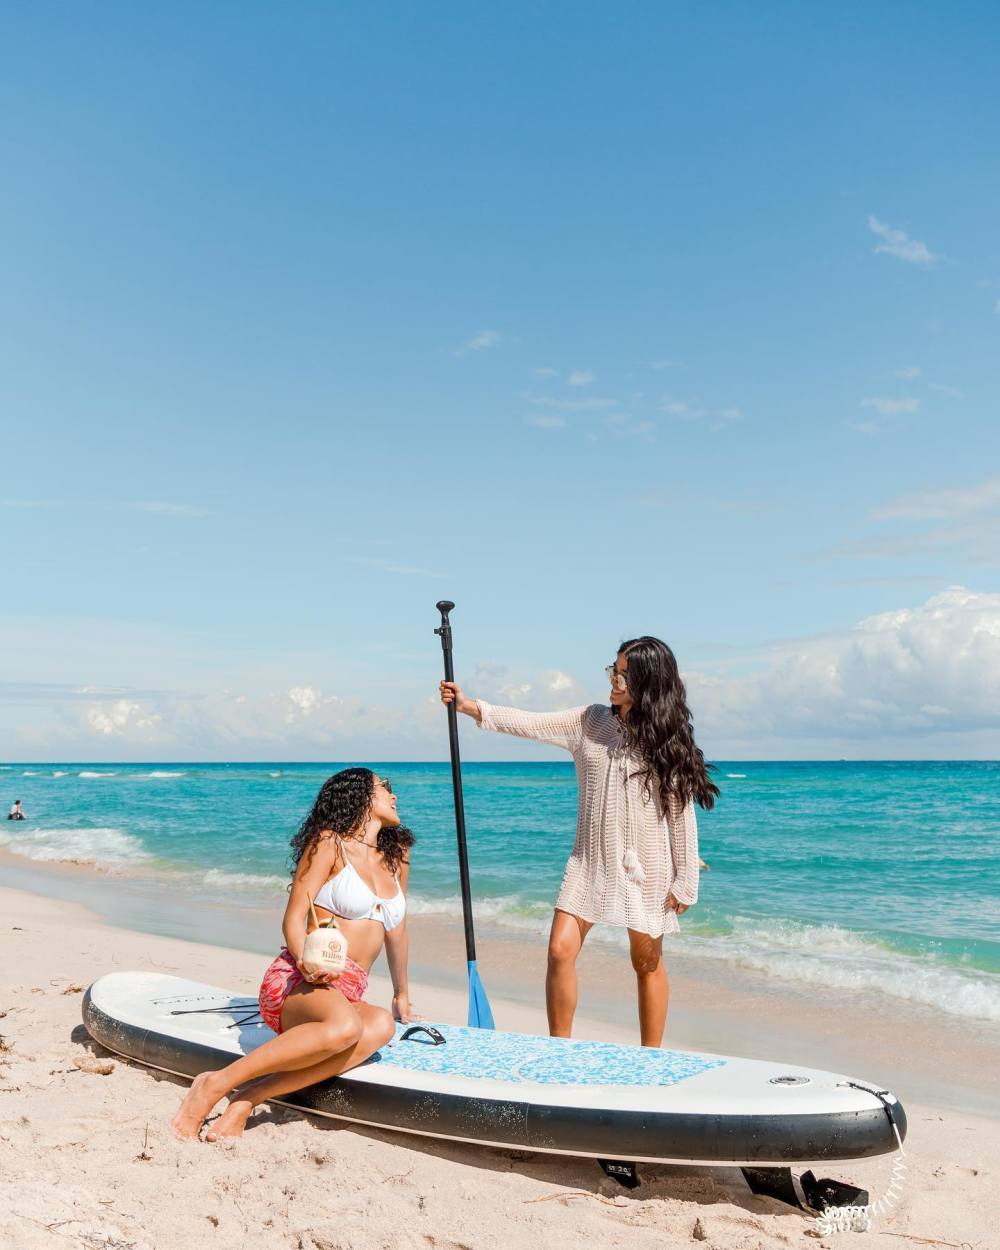 Paddleboard amenity included with stay